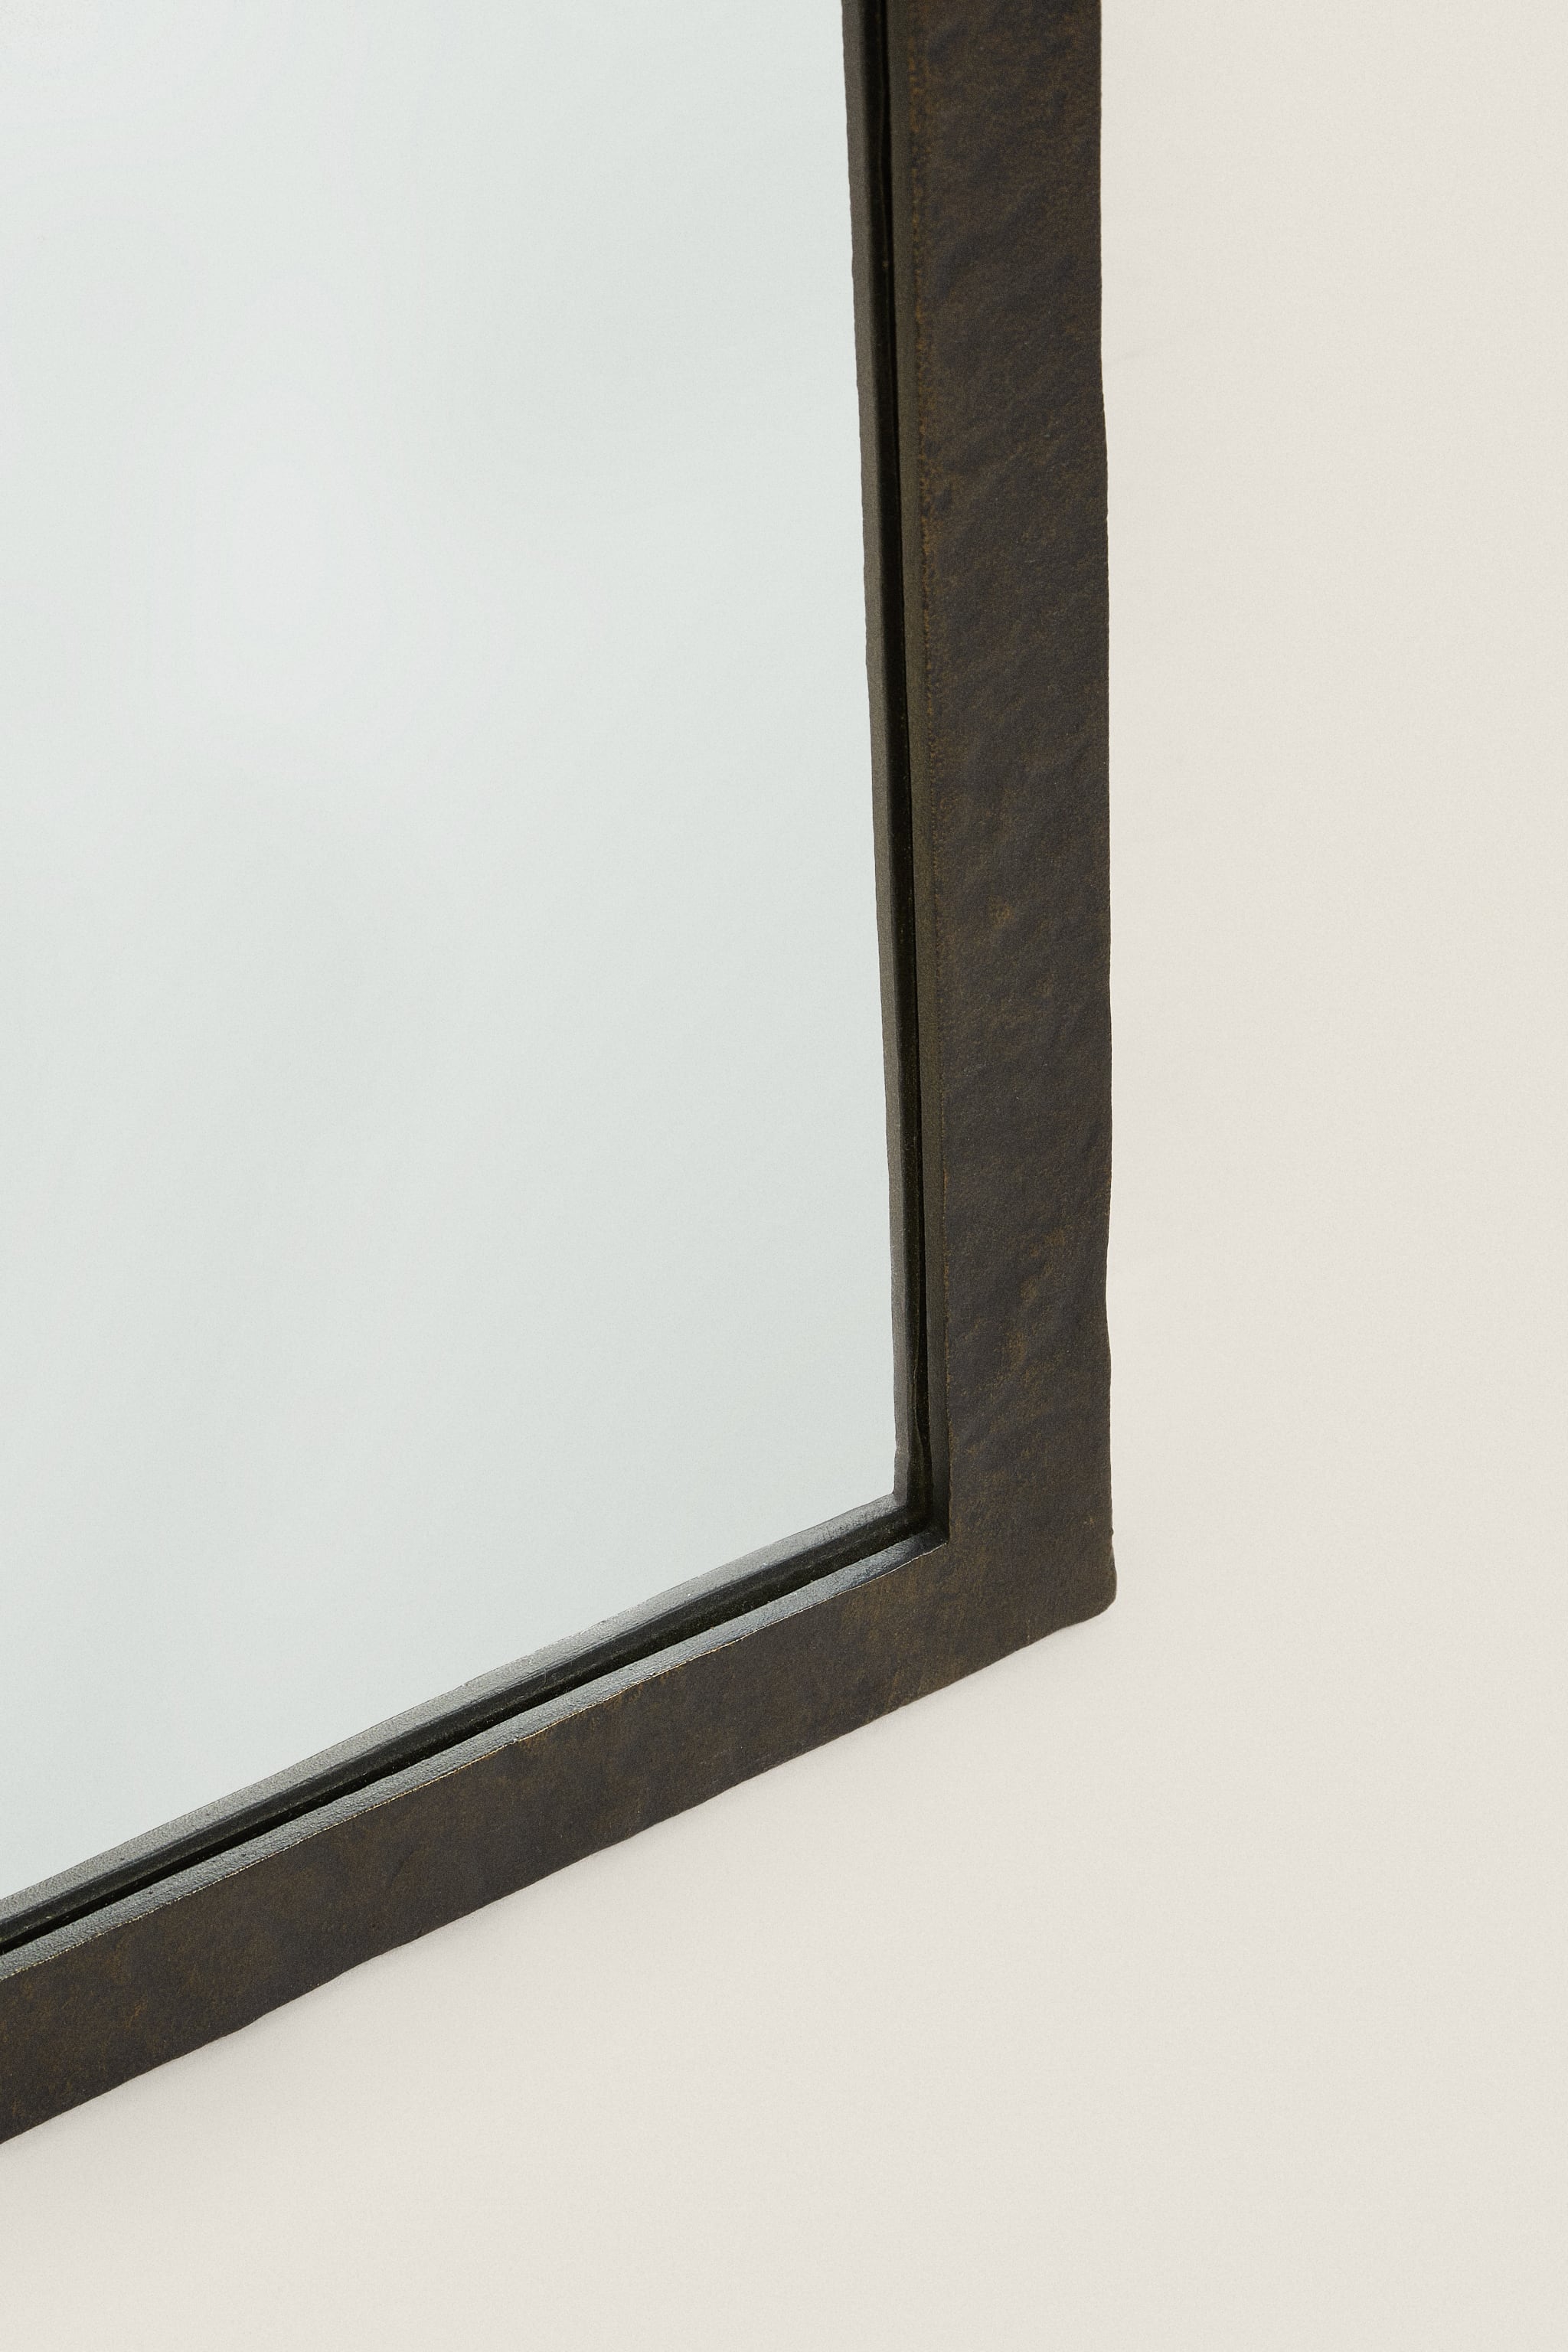 WALL MIRROR WITH METAL FRAME